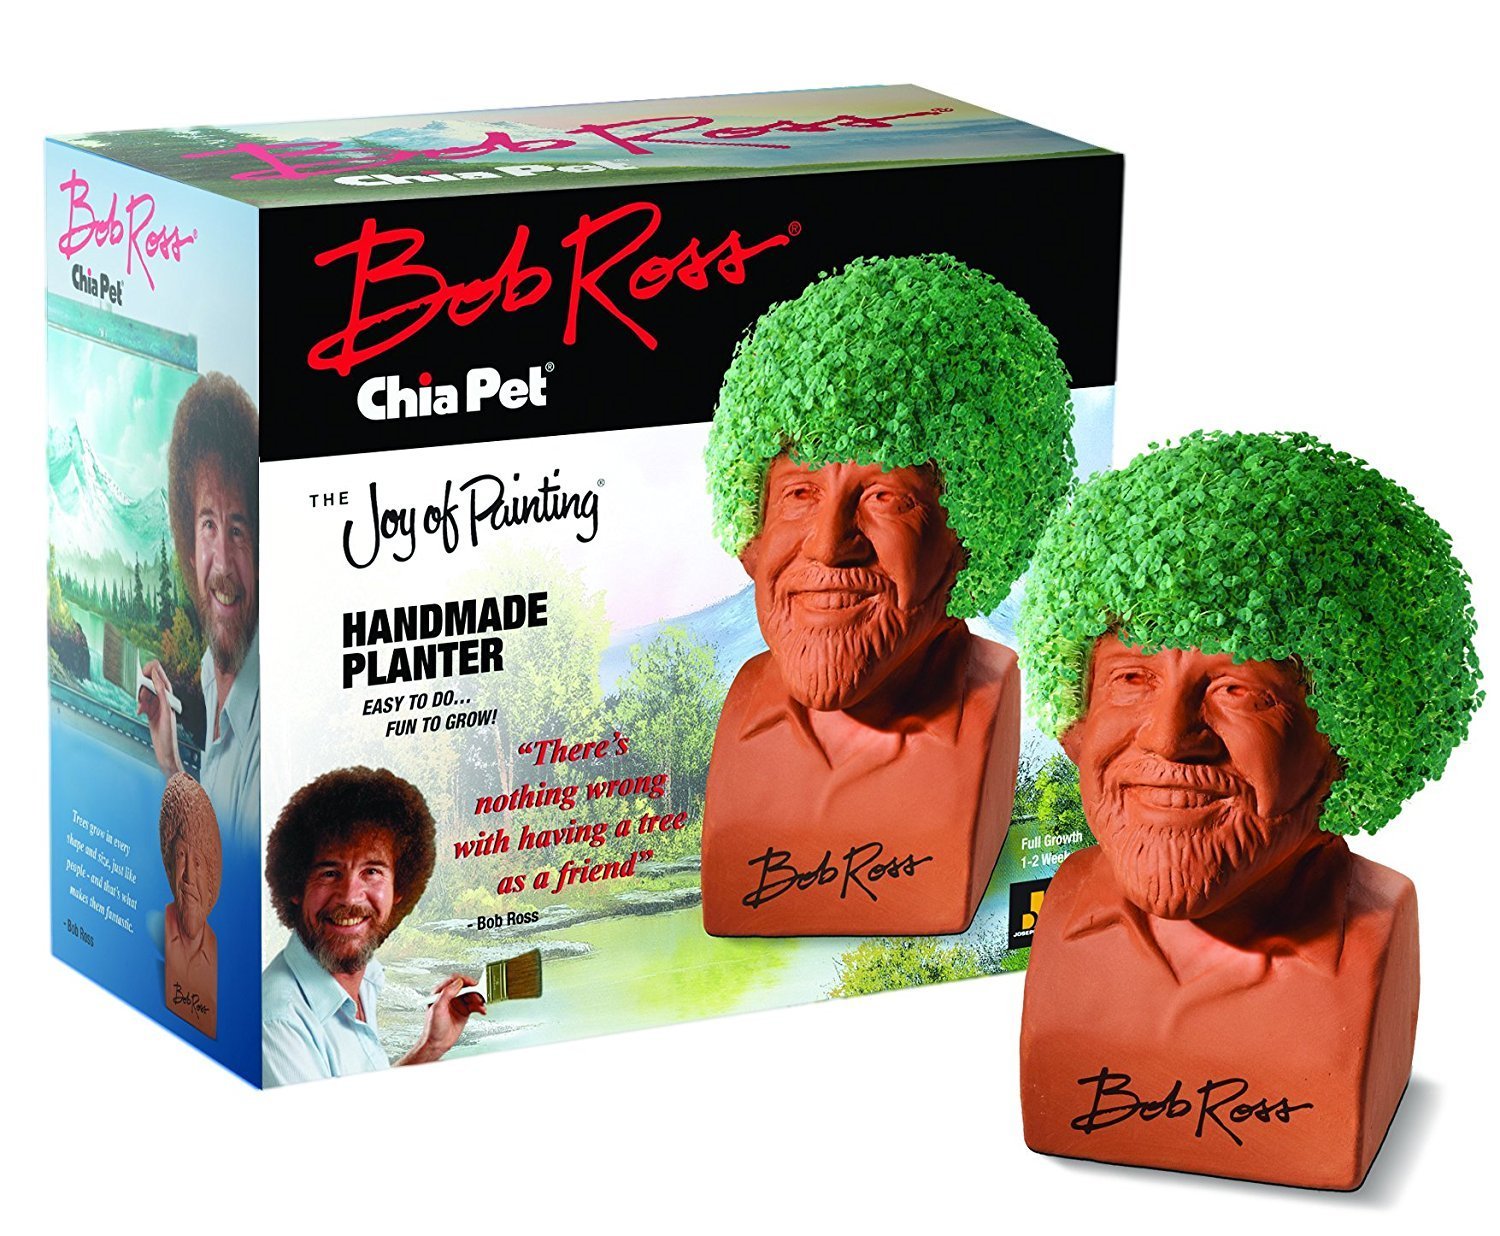 Chia Pet Bob Ross (The Joy of Painting) - Decorative Pot Easy to Do Fun to Grow Chia Seeds Novelty Gift - image 3 of 5